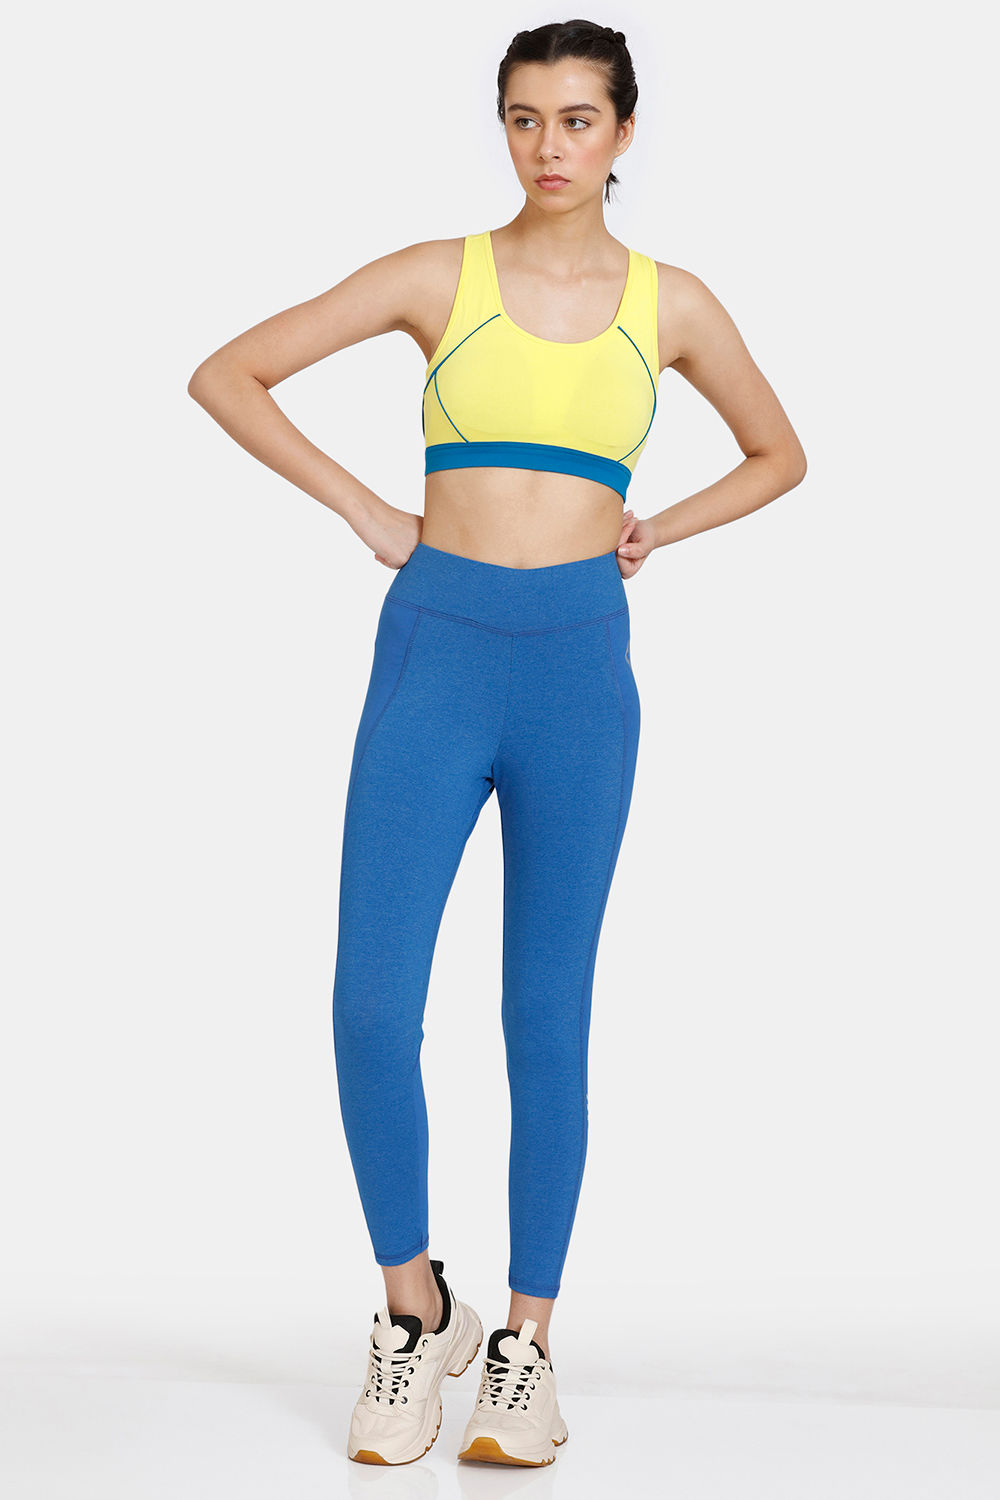 Buy Womens Workout Set Online In India -  India